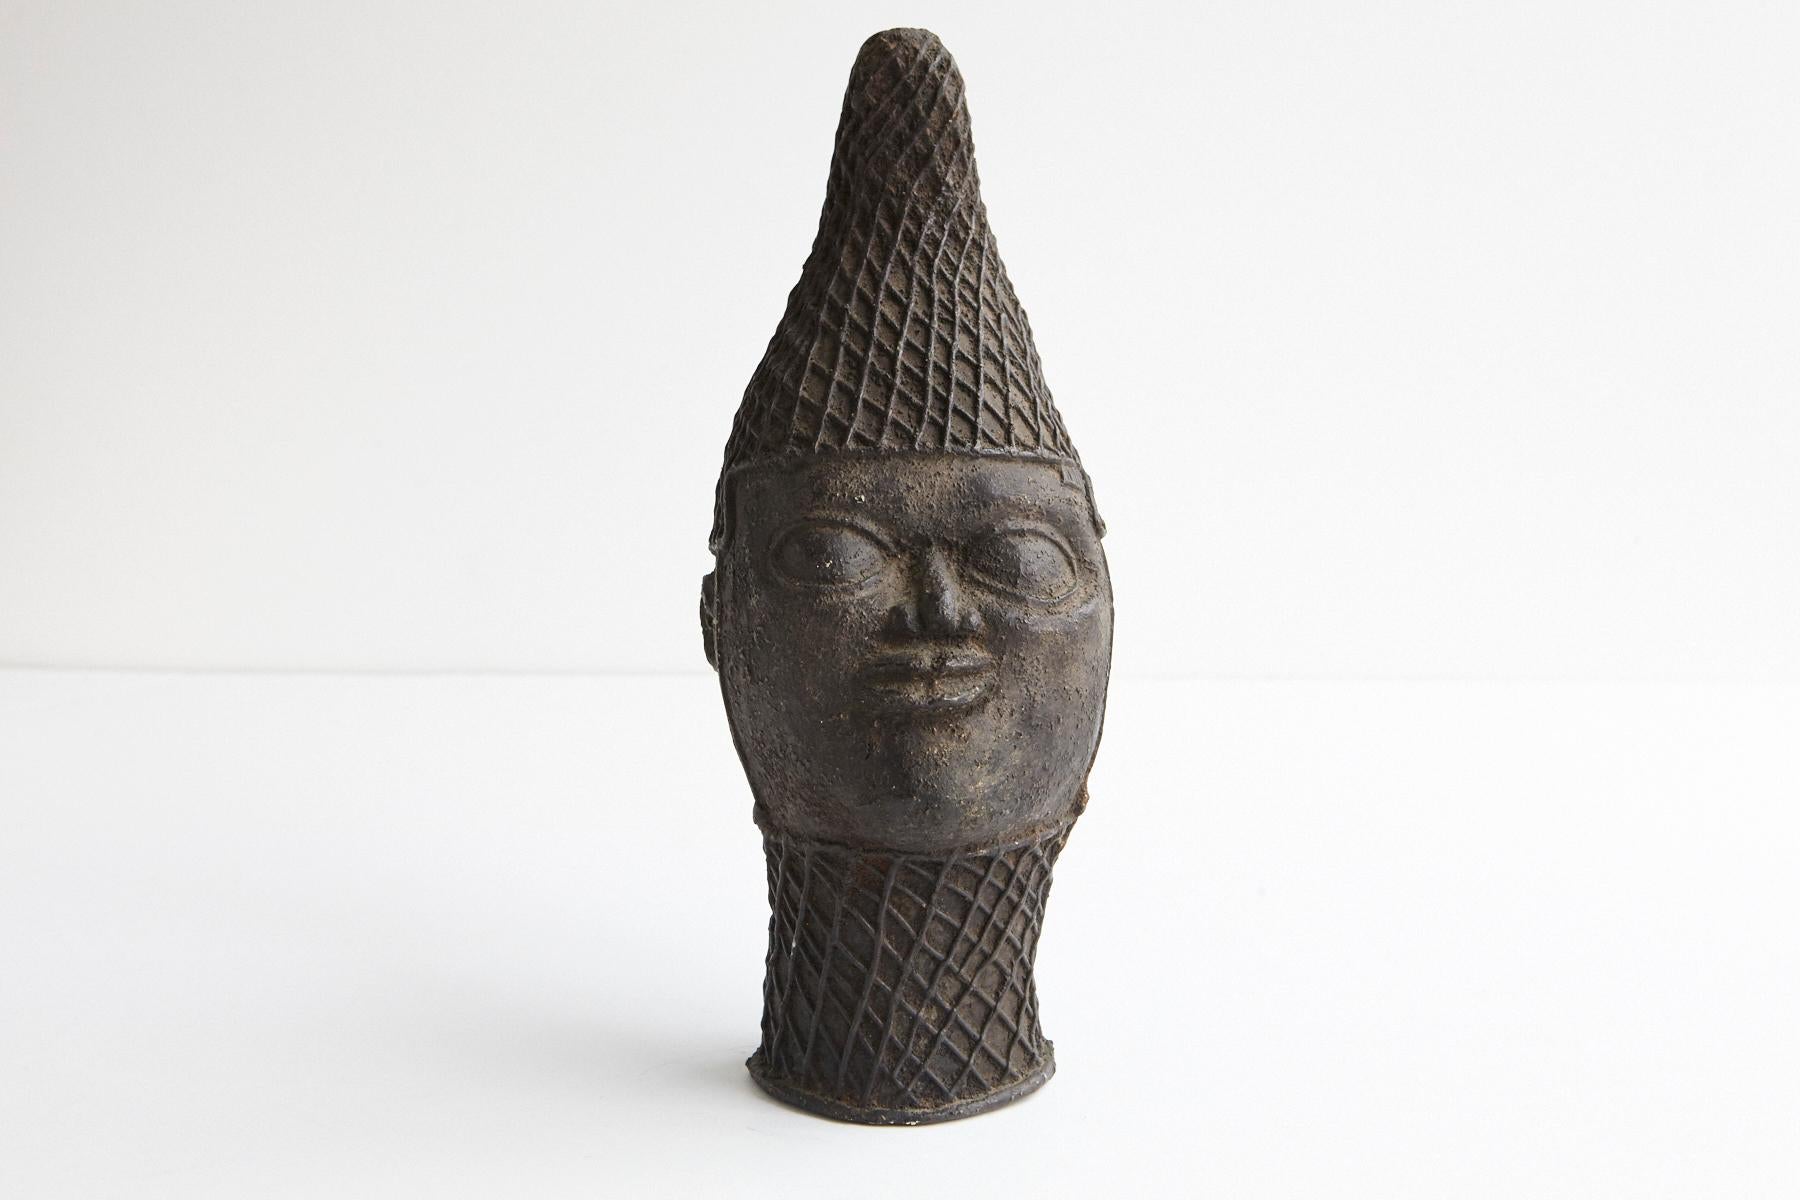 A Benin bronze of an Oba. Oba means ruler in the Yoruba language.
Wearing a lattice-pattern cap with strands of beads suspended around the head.
The neck is bound with a lattice-pattern tight choker.
The head represents the character and destiny of